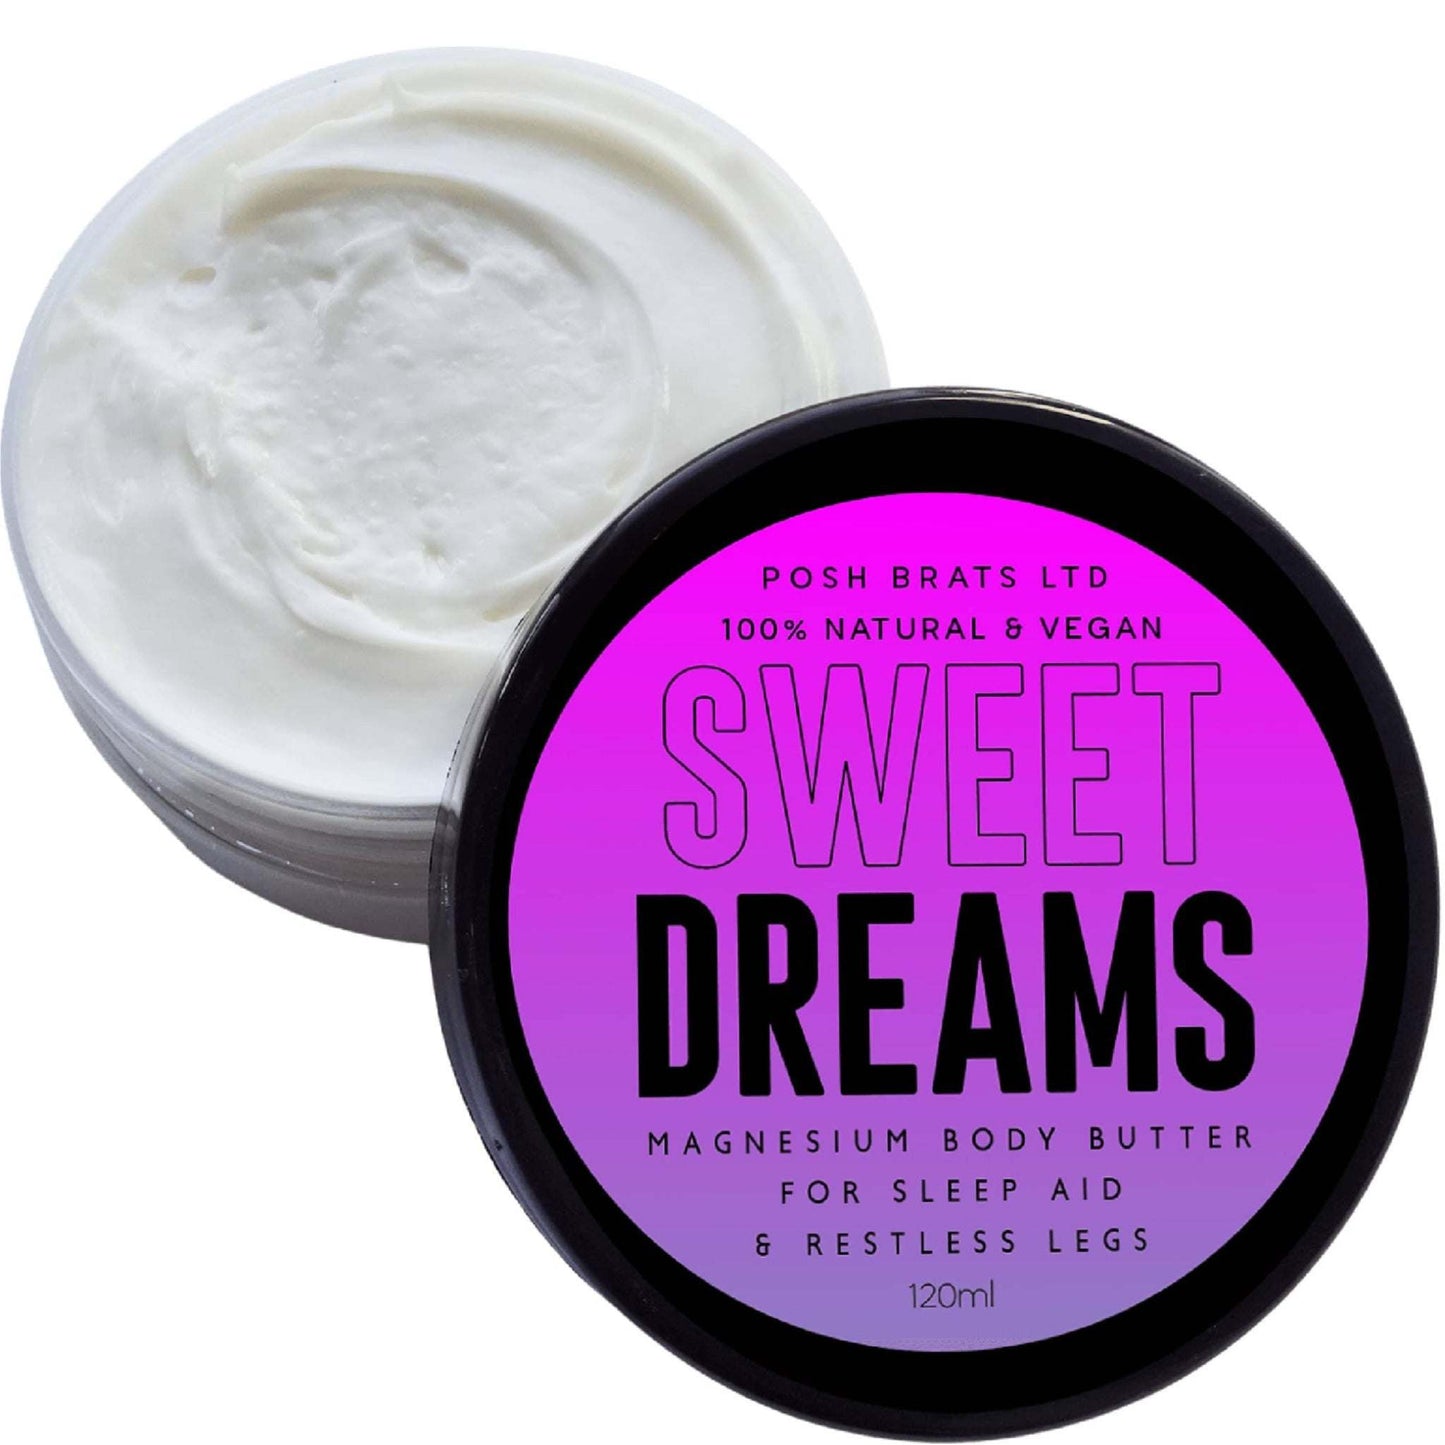 Discover the power of Sweet Dreams Magnesium Body Butter for improved sleep quality! This luxe, hydrating sleep aide awaits.